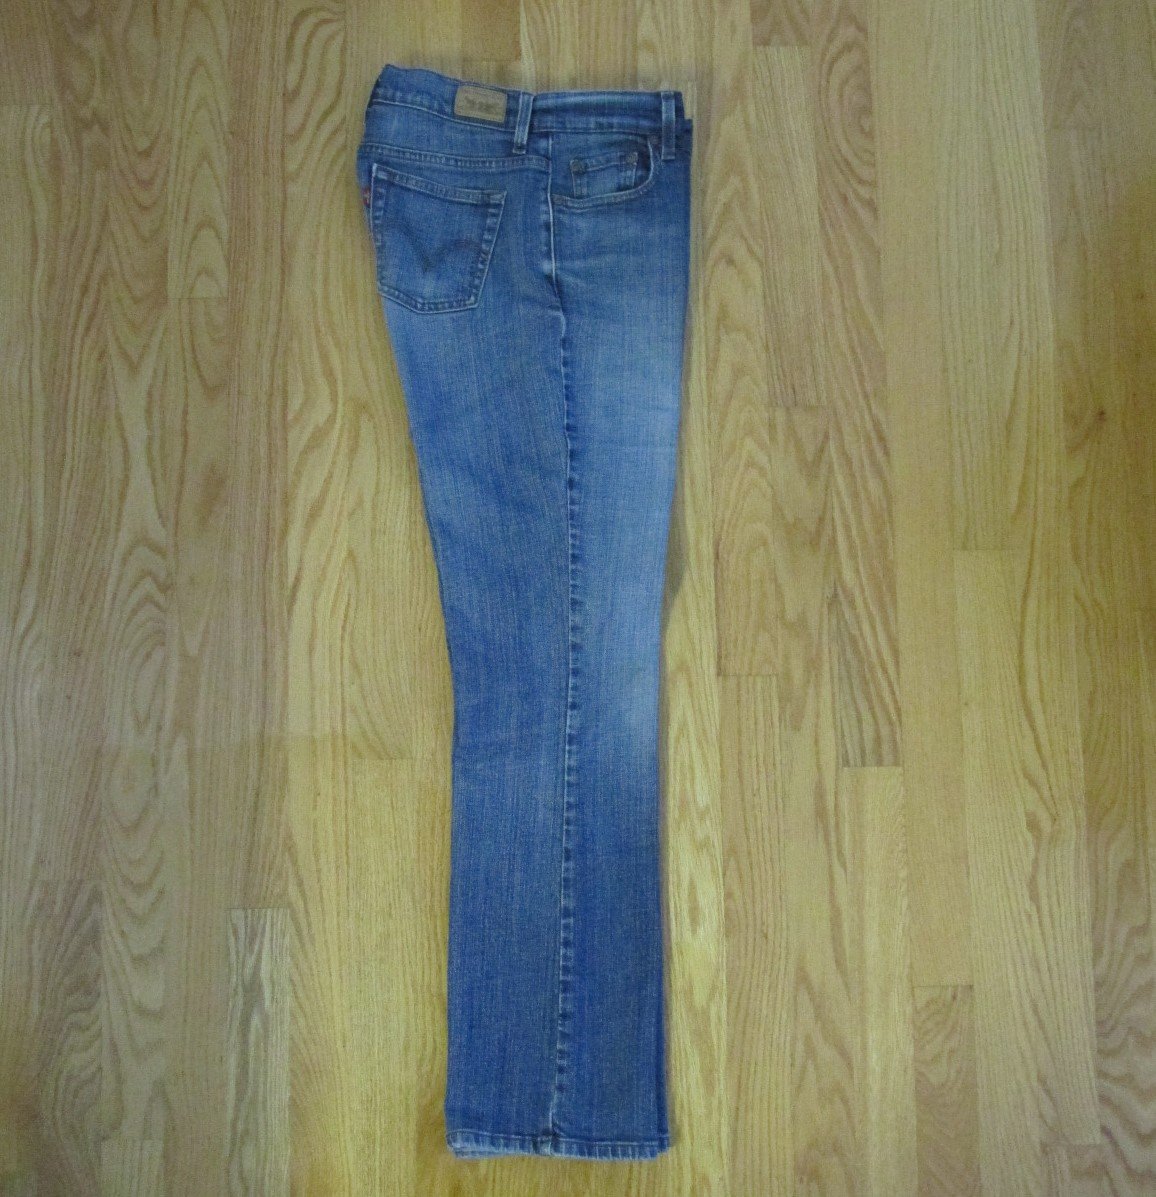 LEVI'S 550 WOMEN'S SIZE 6 M JEANS MED. BLUE DENIM RELAXED BOOT CUT ...